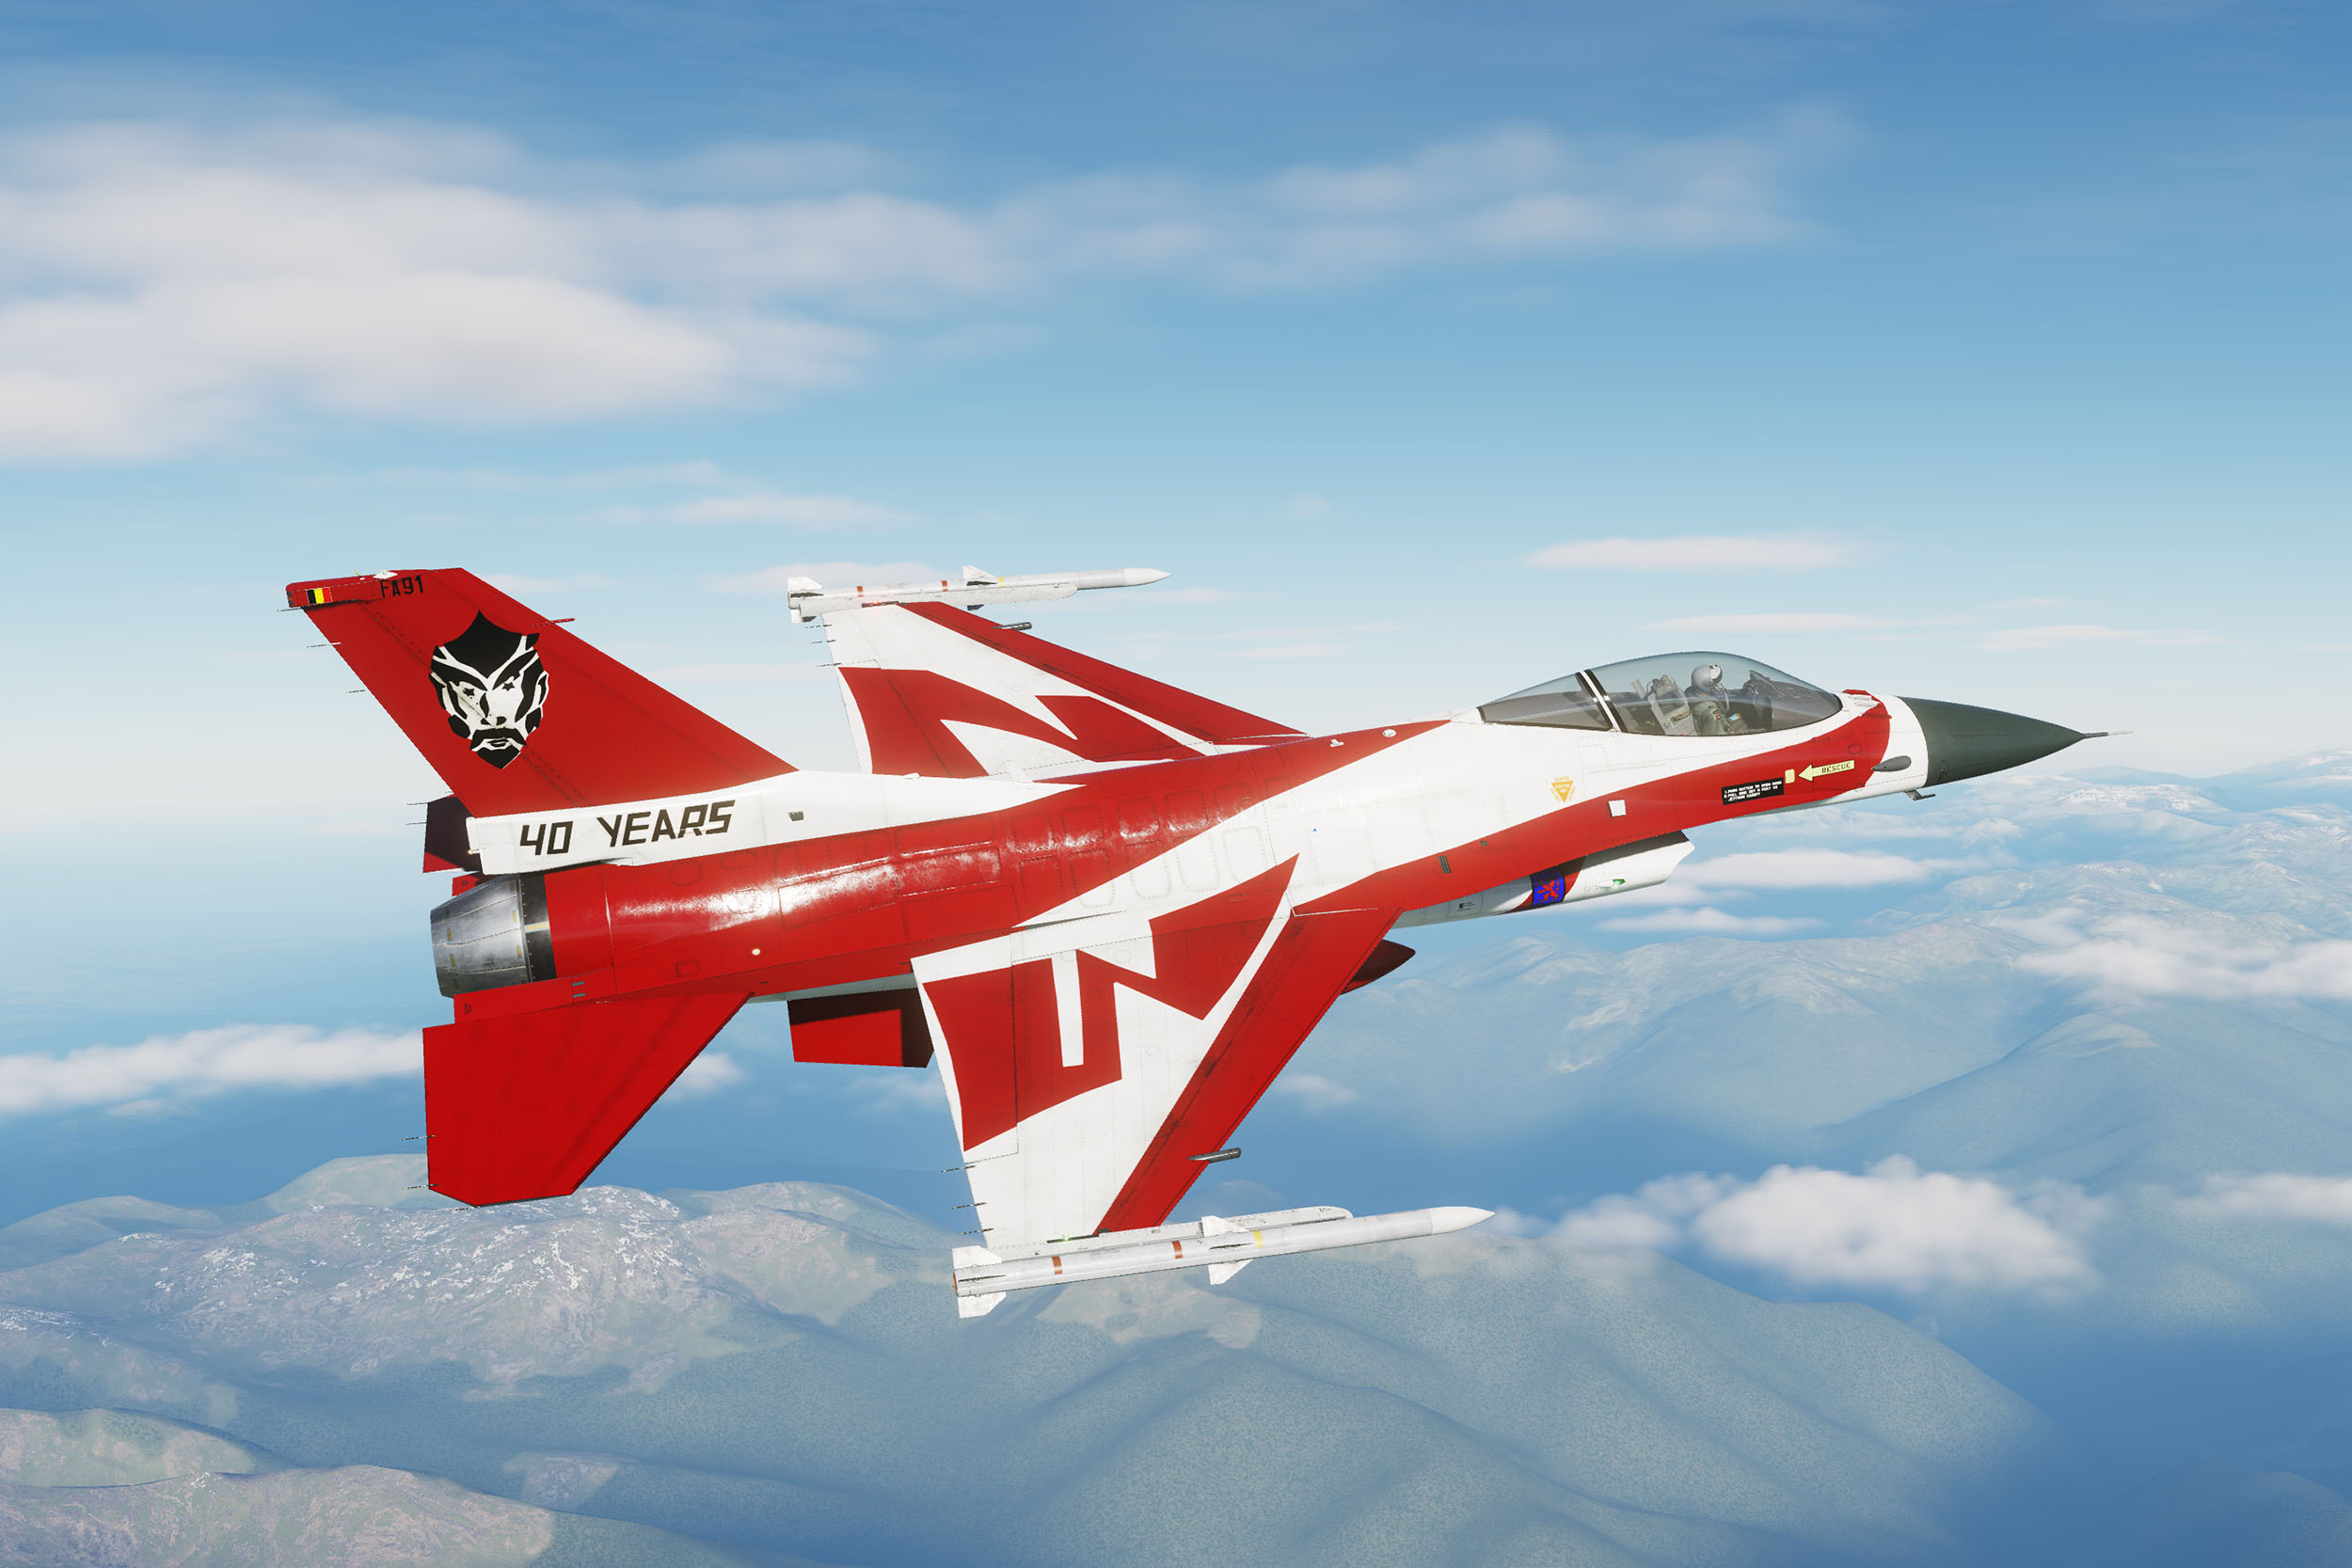 BAF FA-91 -Special Paint 40 Years - 23rd Devil Squadron - 10th Tac. Wing Kleine-Brogel